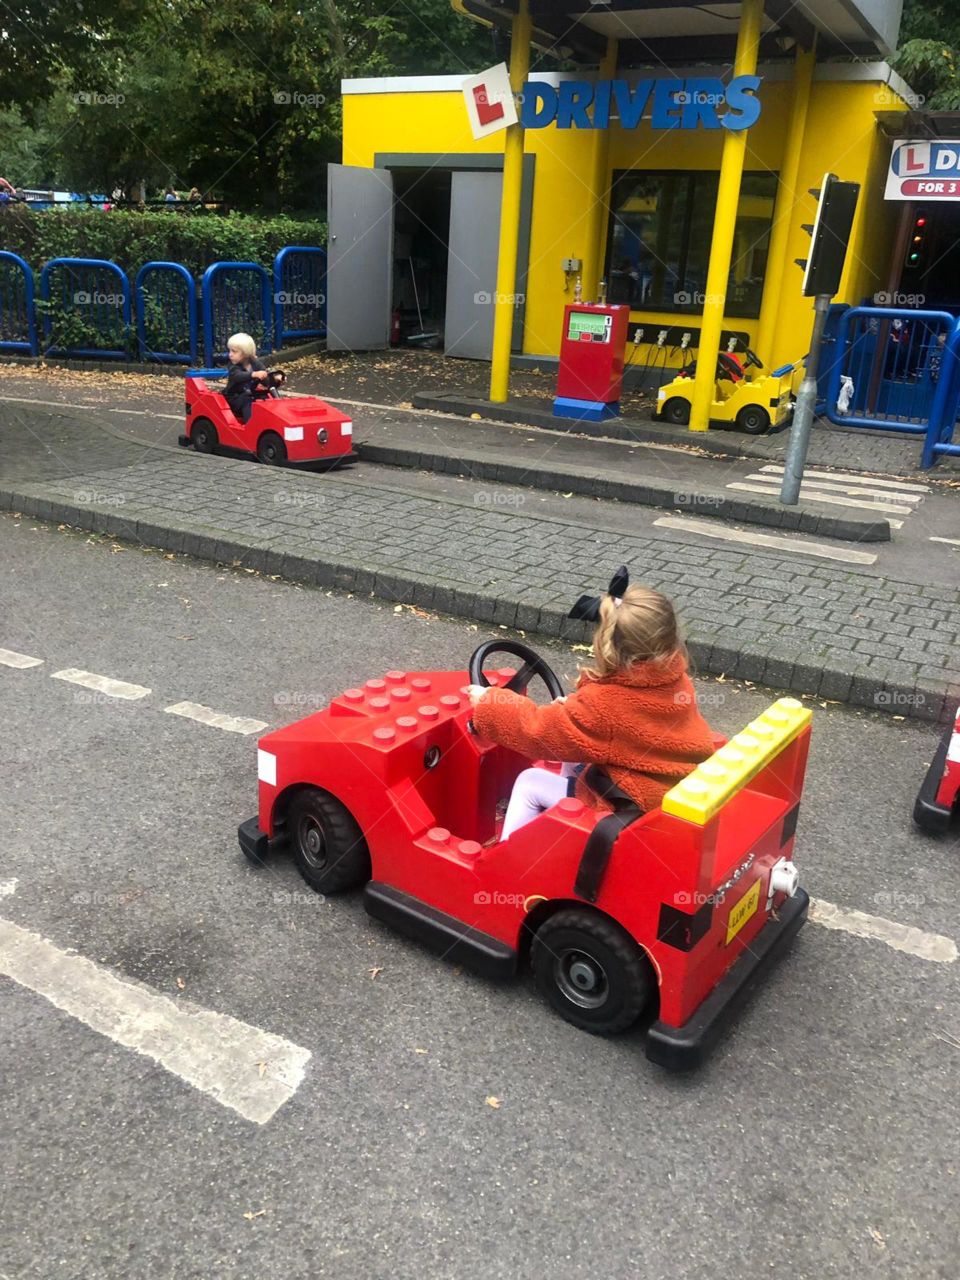 Little one’s driving there Lego cars at Lego Land ‘ England 🏴󠁧󠁢󠁥󠁮󠁧󠁿